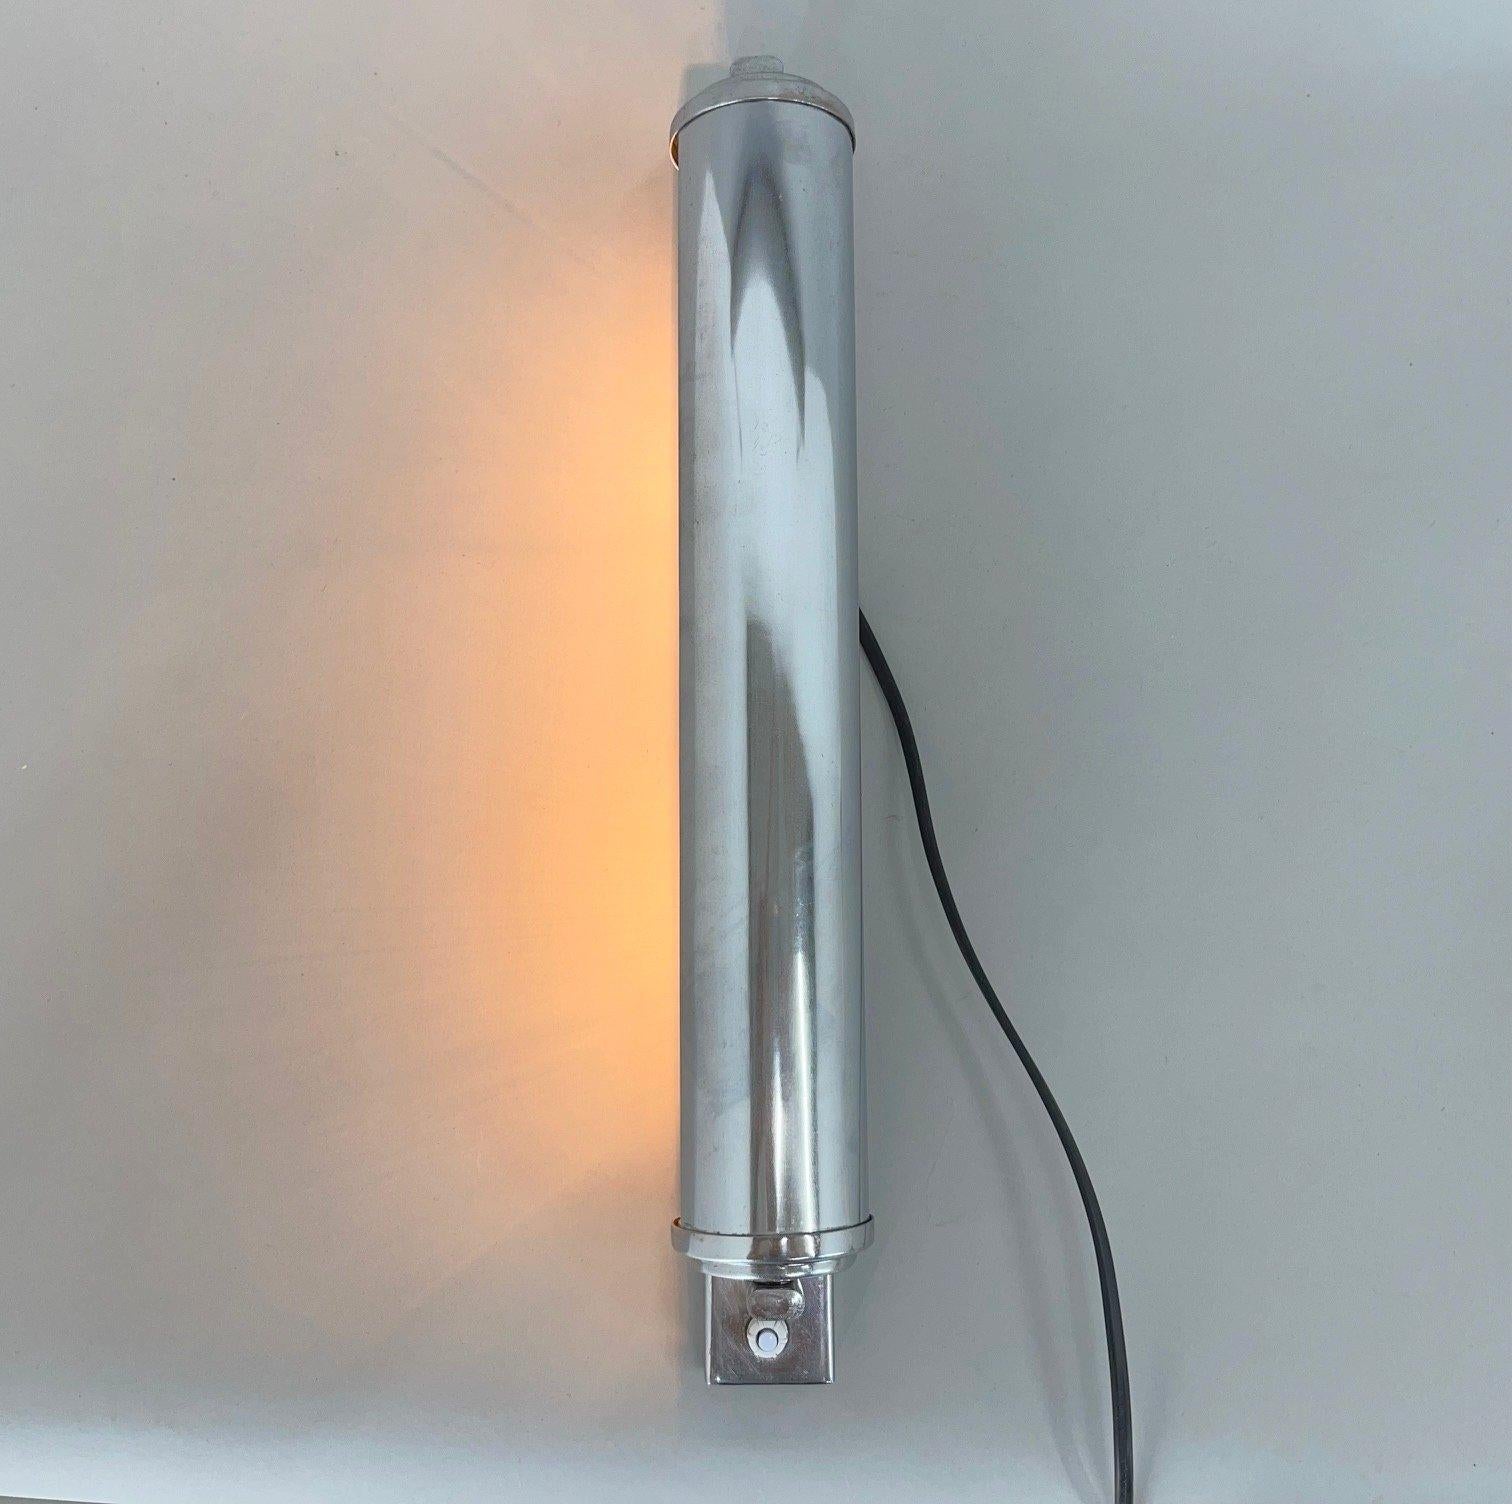 Mid-20th Century 1930's Bauhaus or Functionalist Chrome Wall Lamp with Adjustable Shade